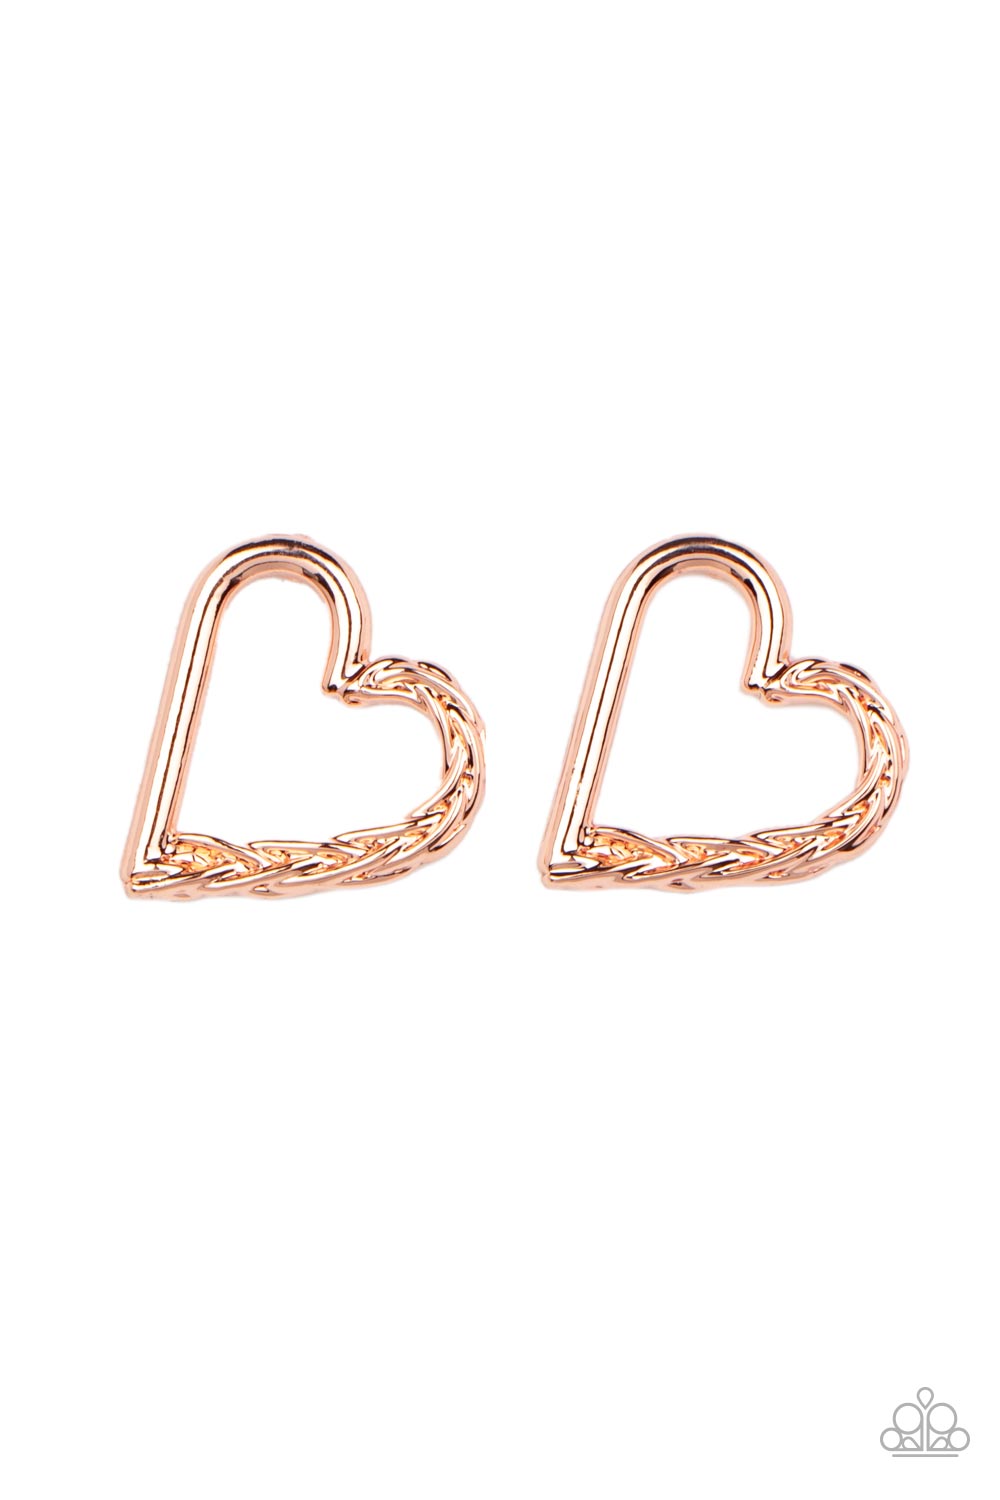 Cupid, Who? Copper Heart Post Earrings - Paparazzi Accessories- lightbox - CarasShop.com - $5 Jewelry by Cara Jewels